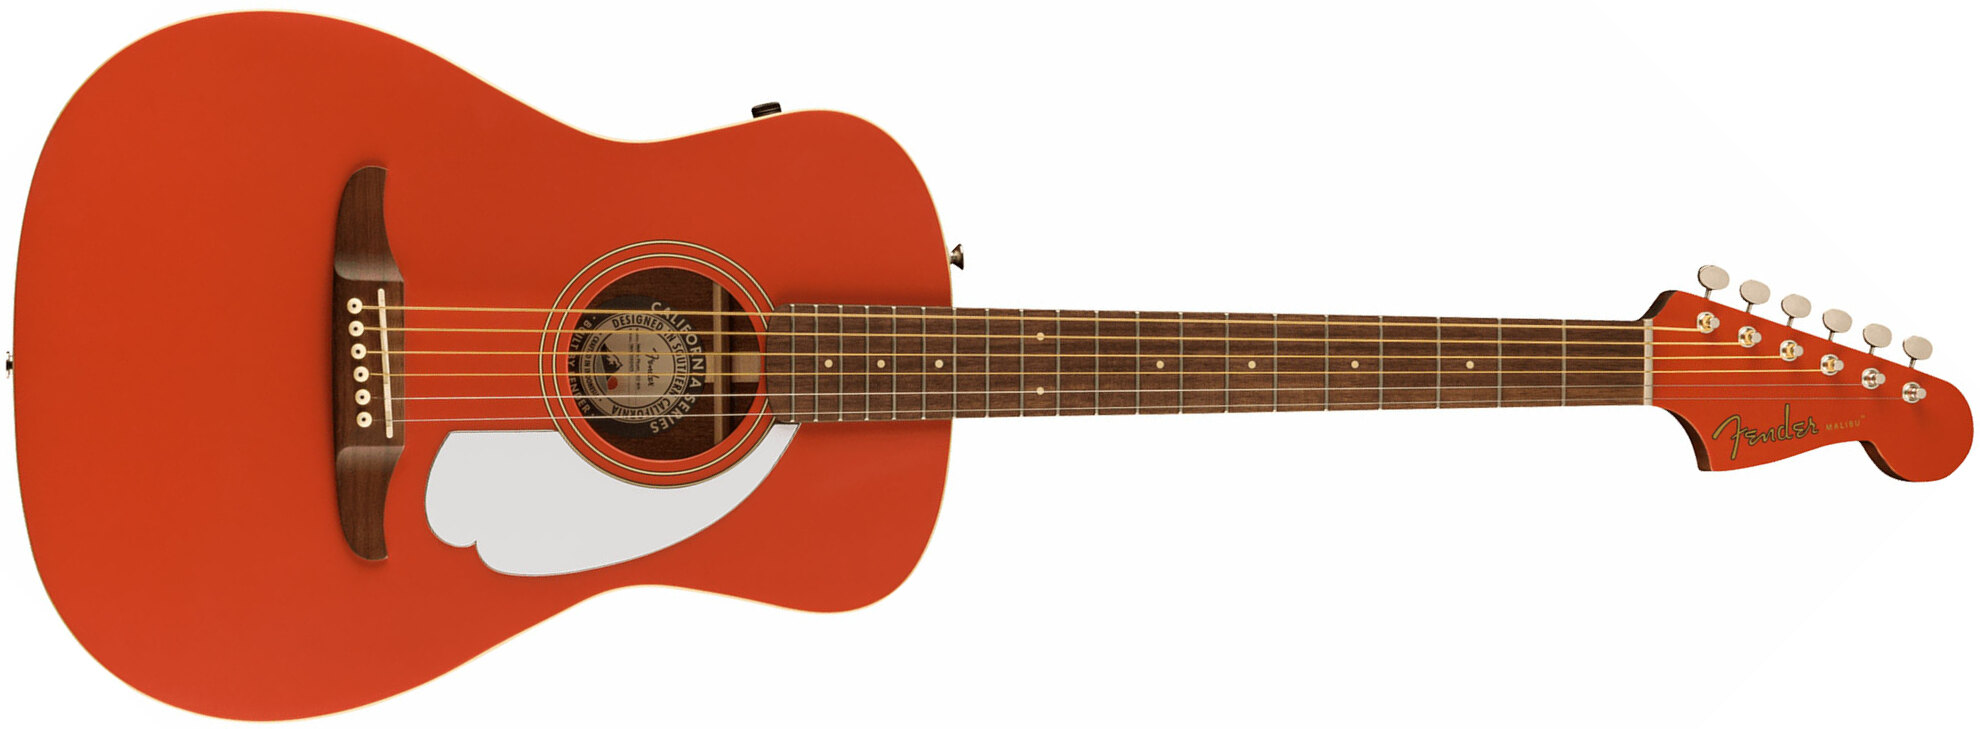 Fender Malibu Player 2023 Parlor Epicea Sapele Wal - Fiesta Red - Electro acoustic guitar - Main picture